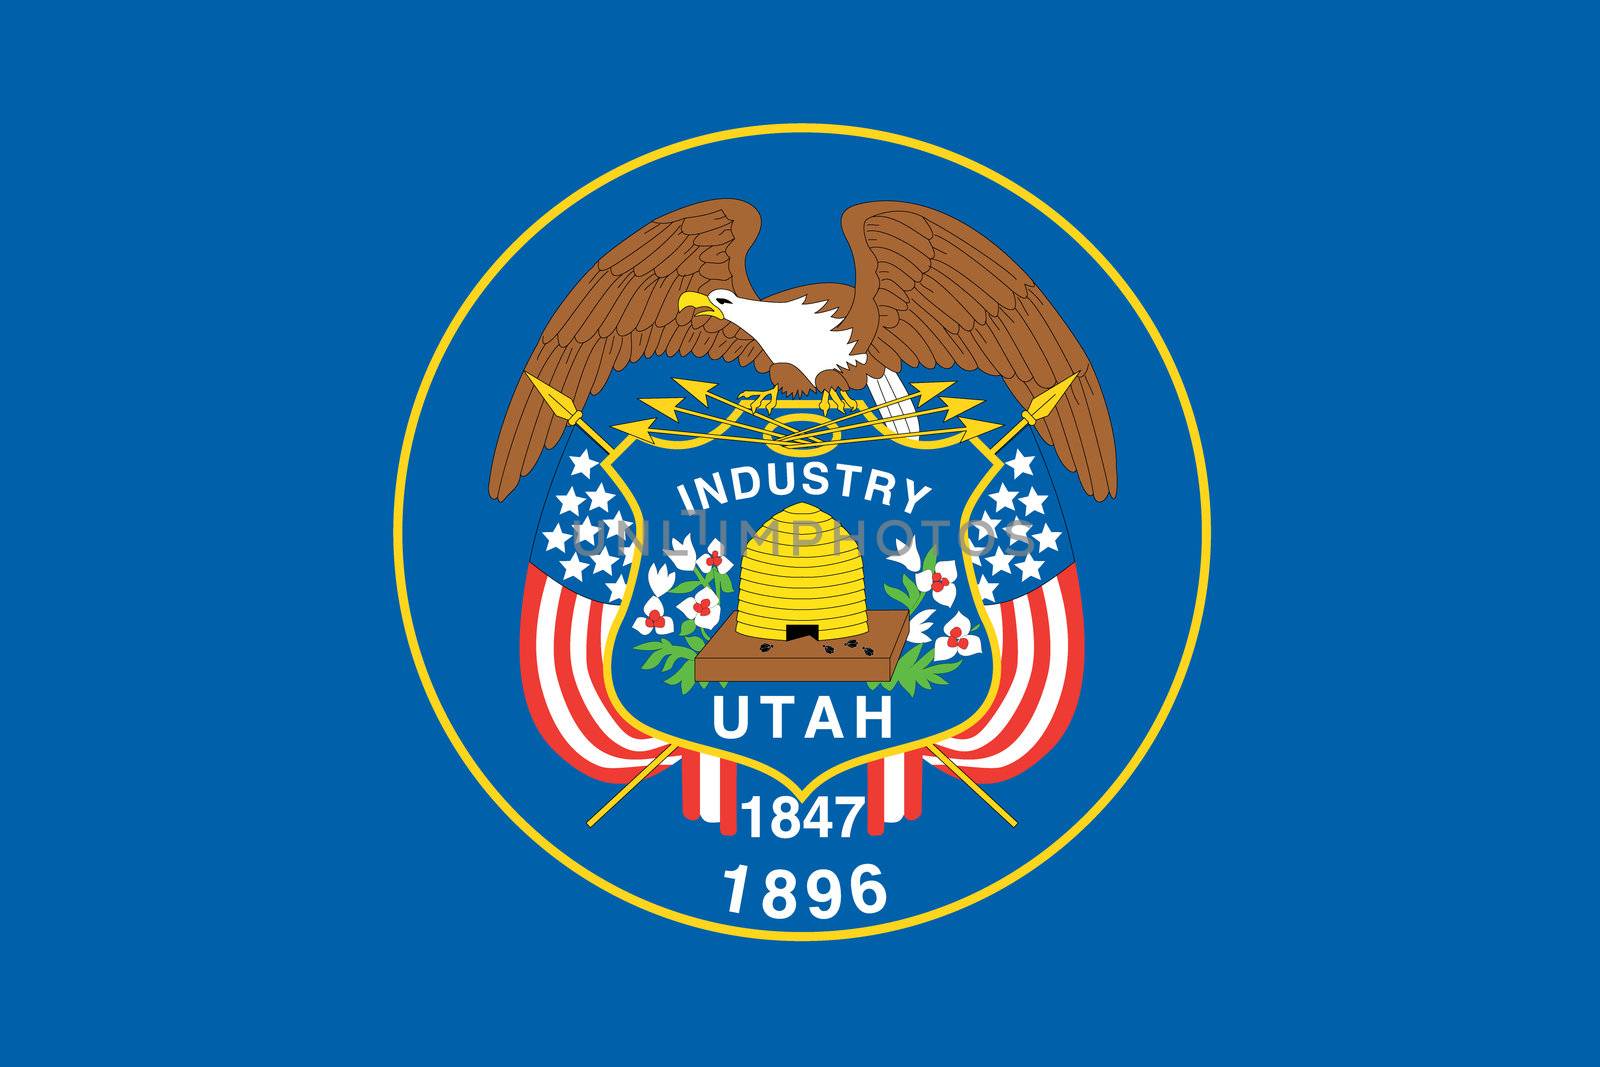 The Flag of the American State of Utah